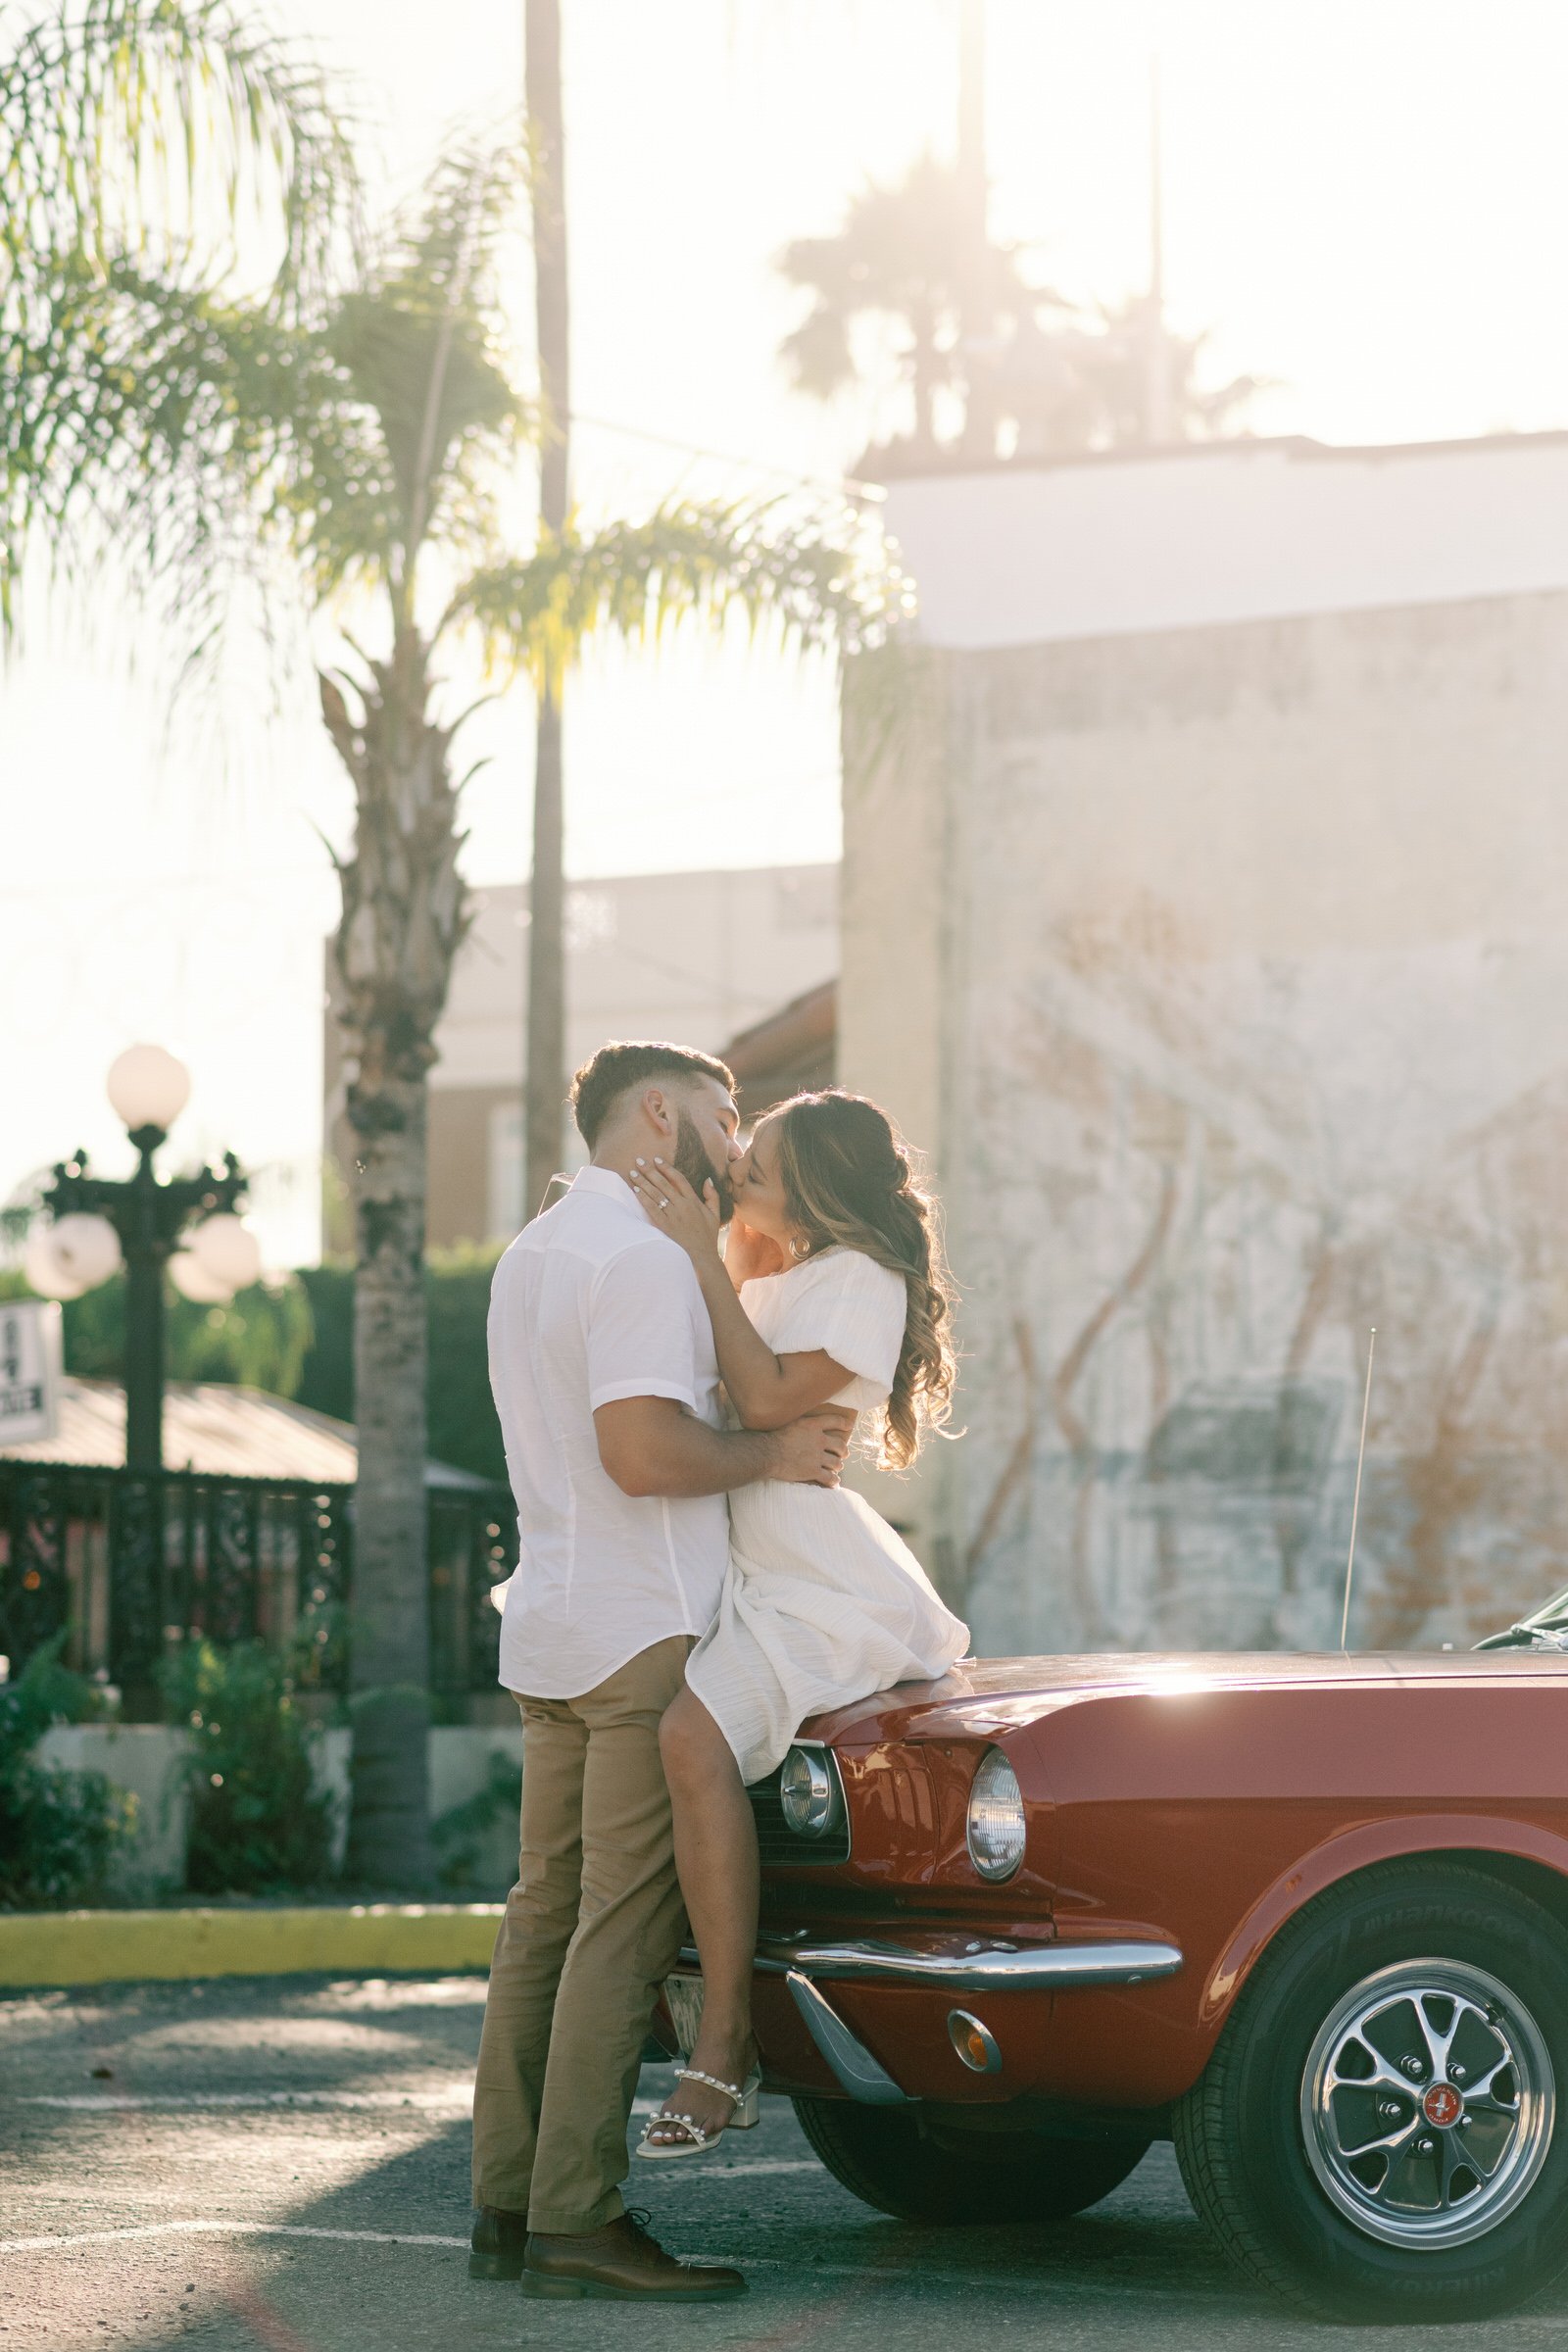 Copyright-Dewitt-for-Love-Photography-M-M-Ybor-City-Tampa-Engagement-Session-27.jpg